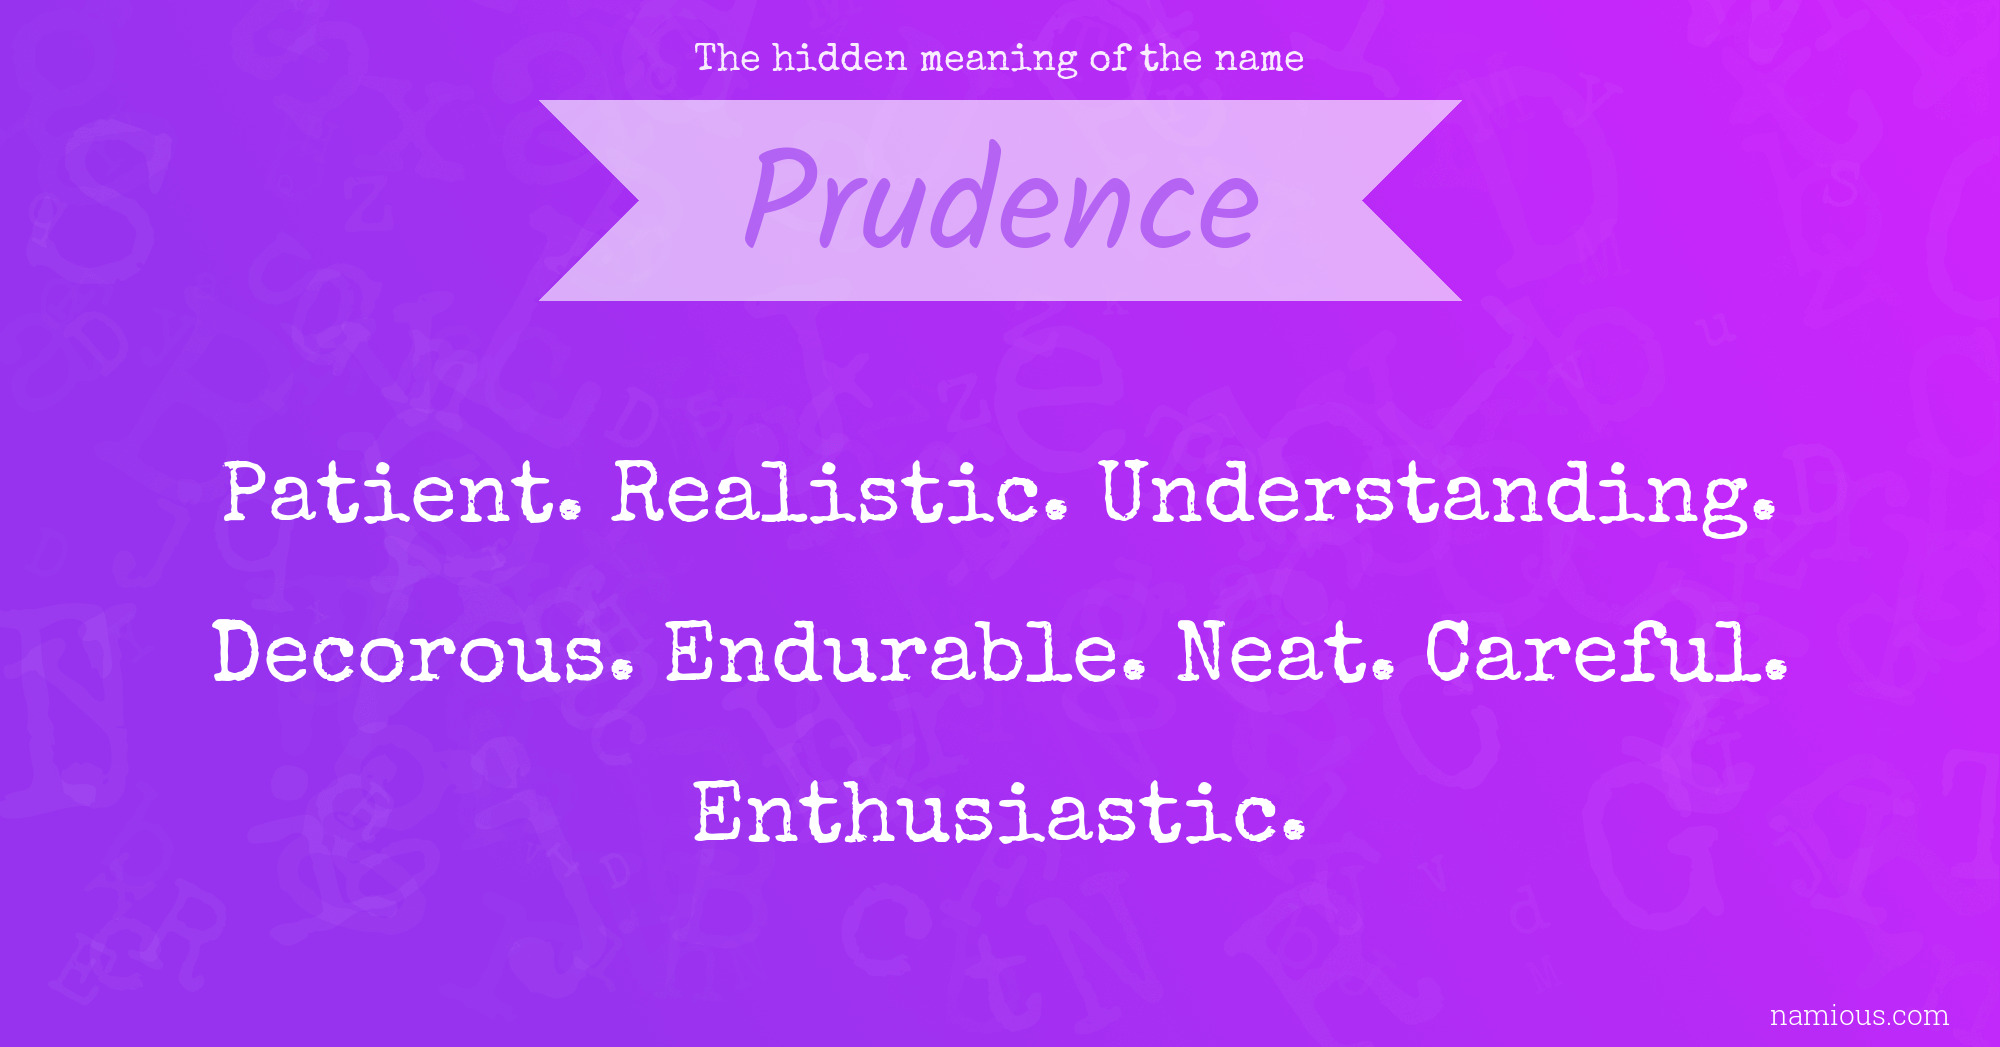 The hidden meaning of the name Prudence